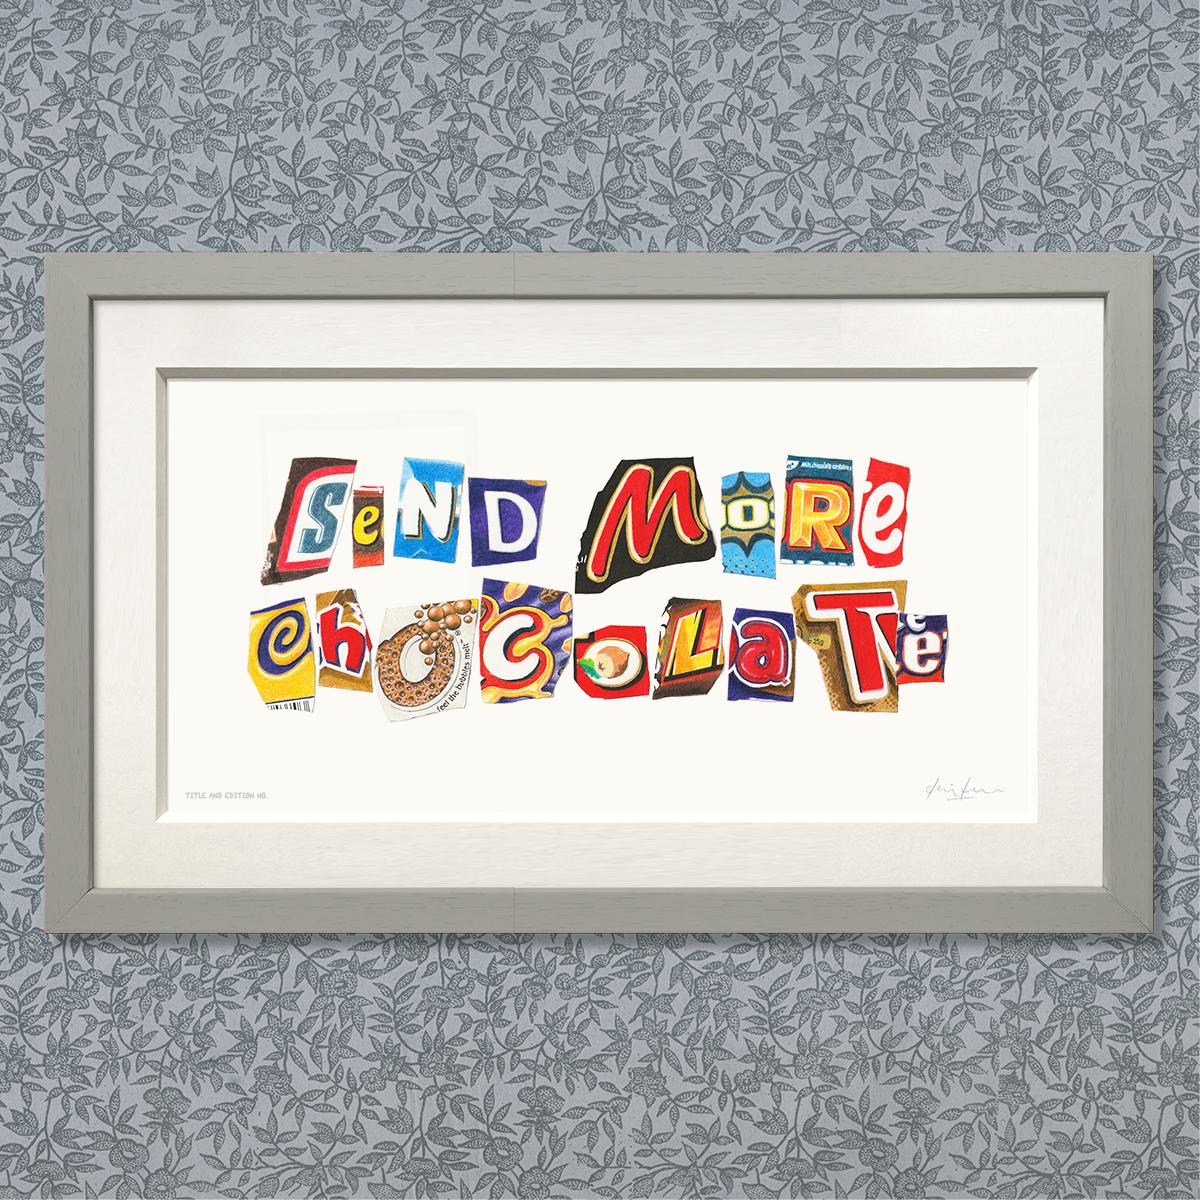 Limited edition print (large version) of drawing of cut-out letters - Send More Chocolate - in a grey frame.